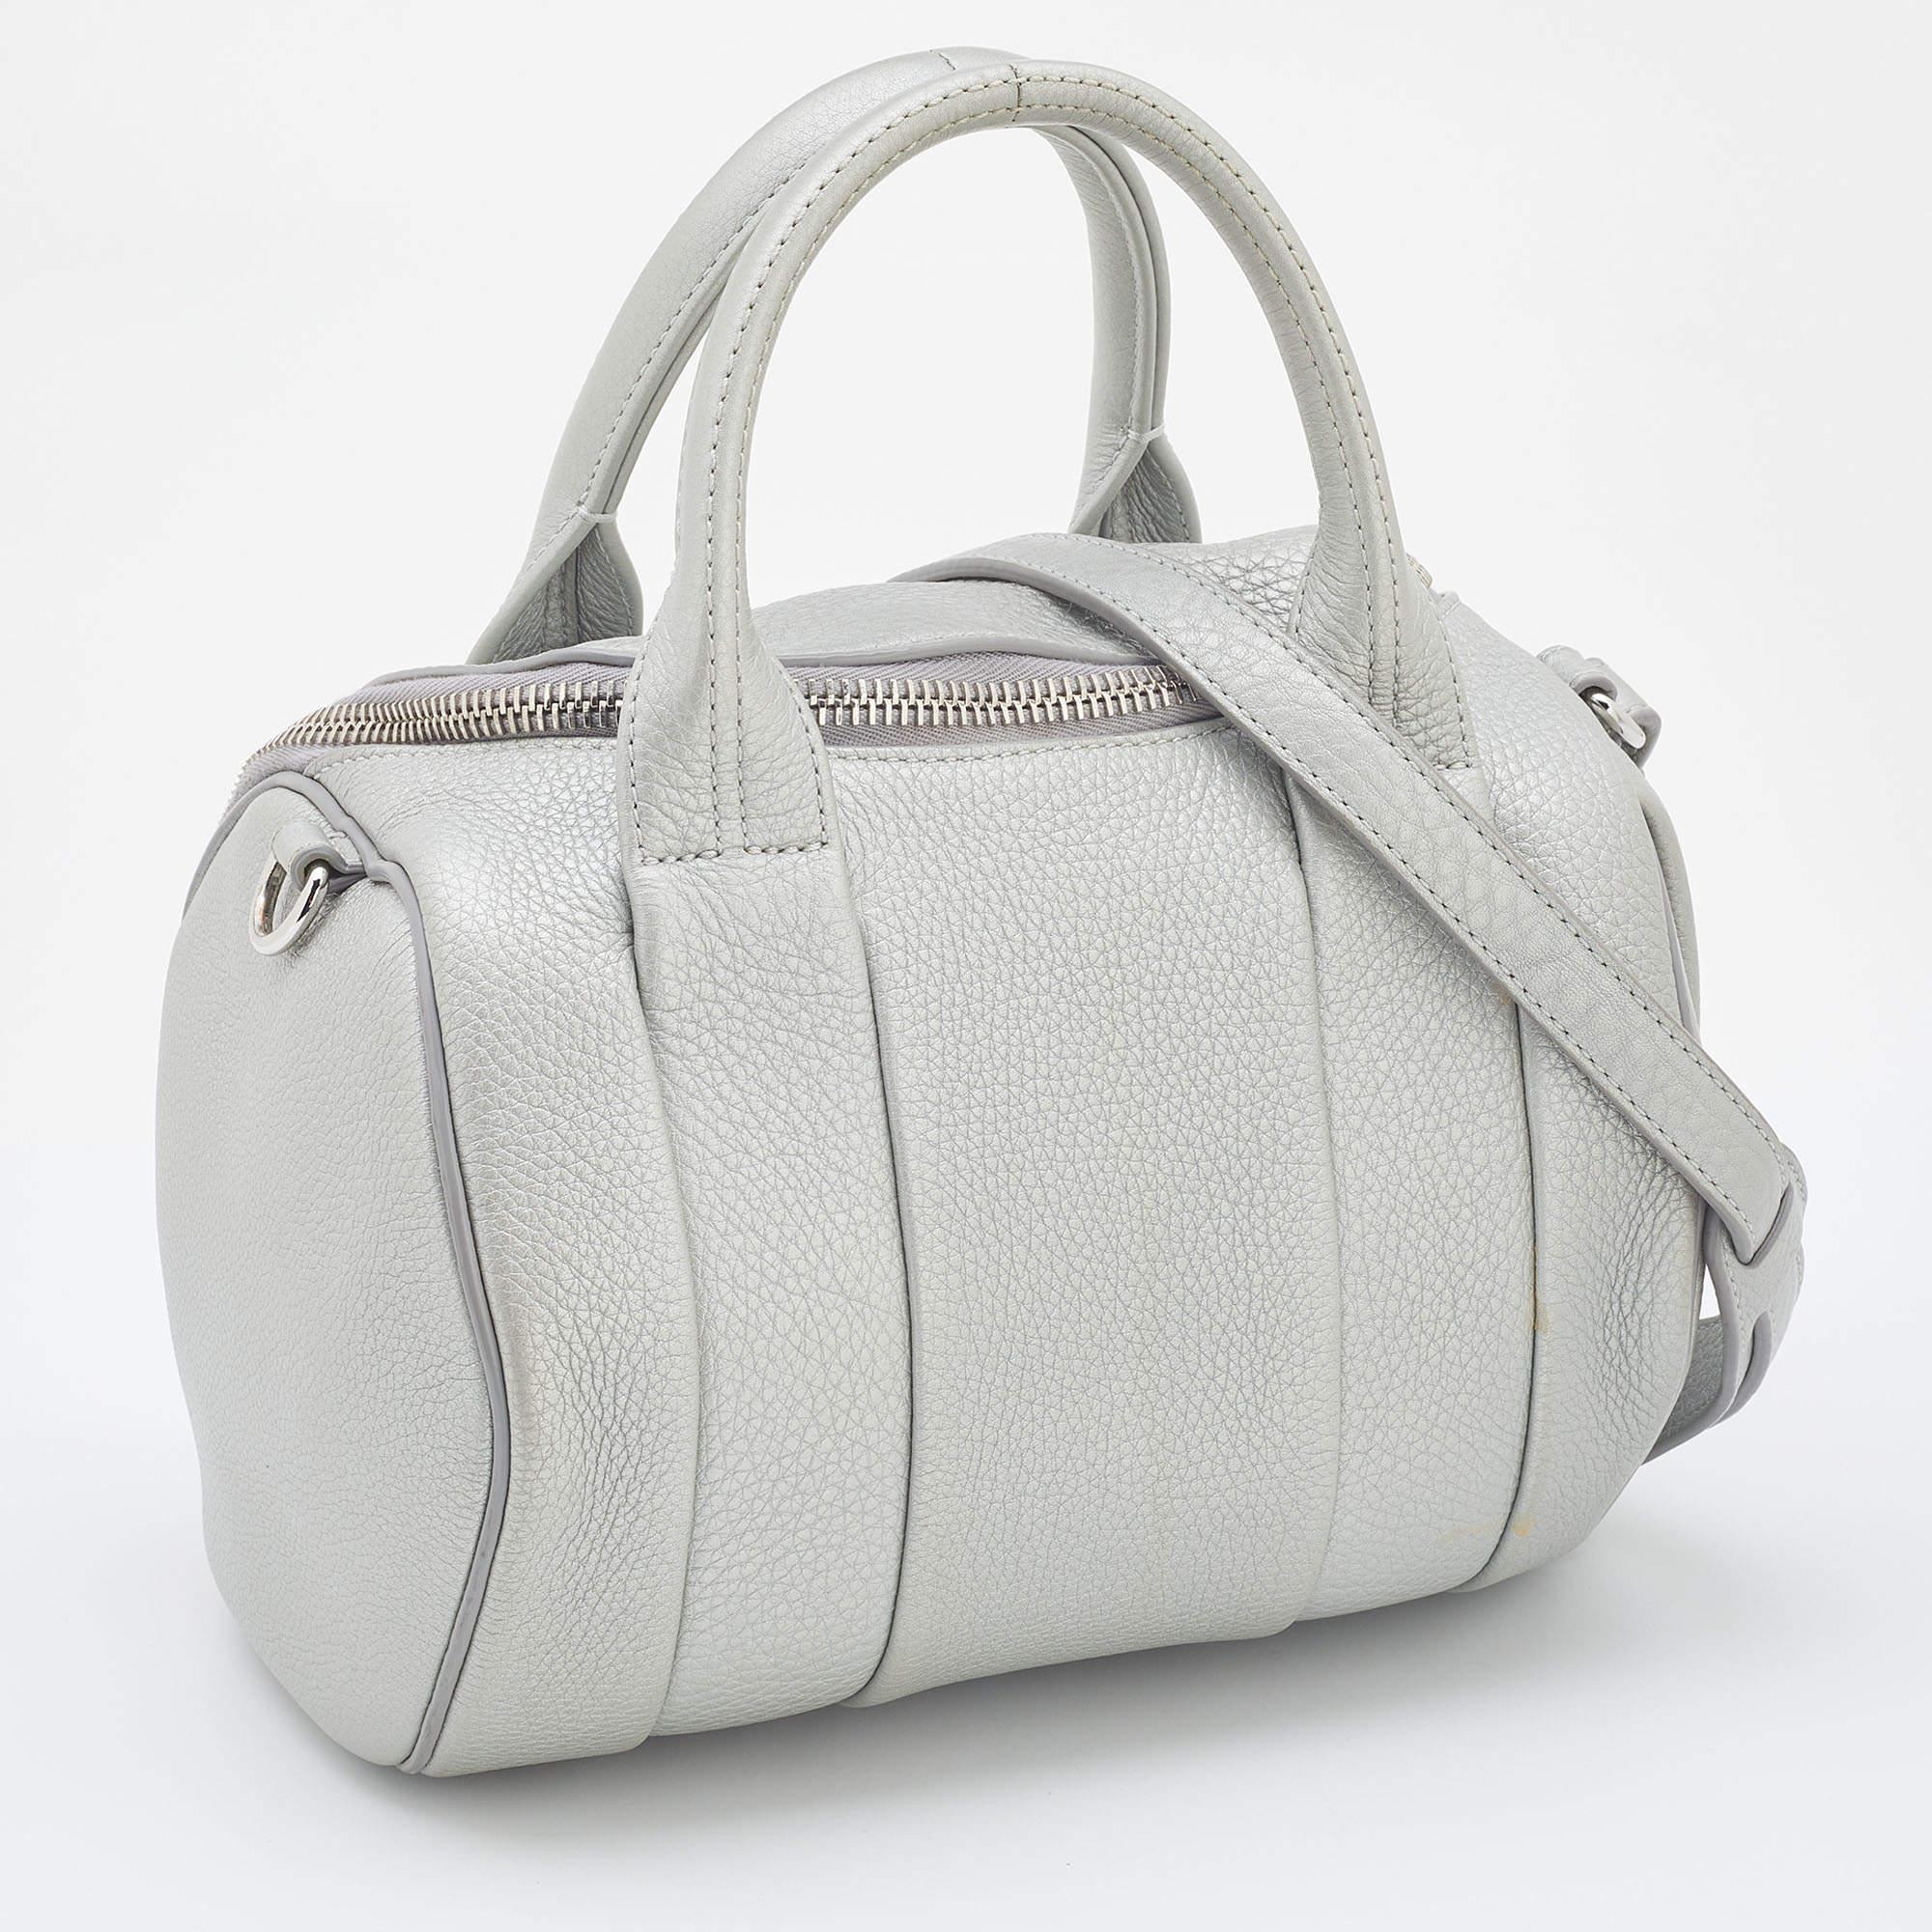 Women's or Men's Alexander Wang Silver Textured Leather Rocco Bag